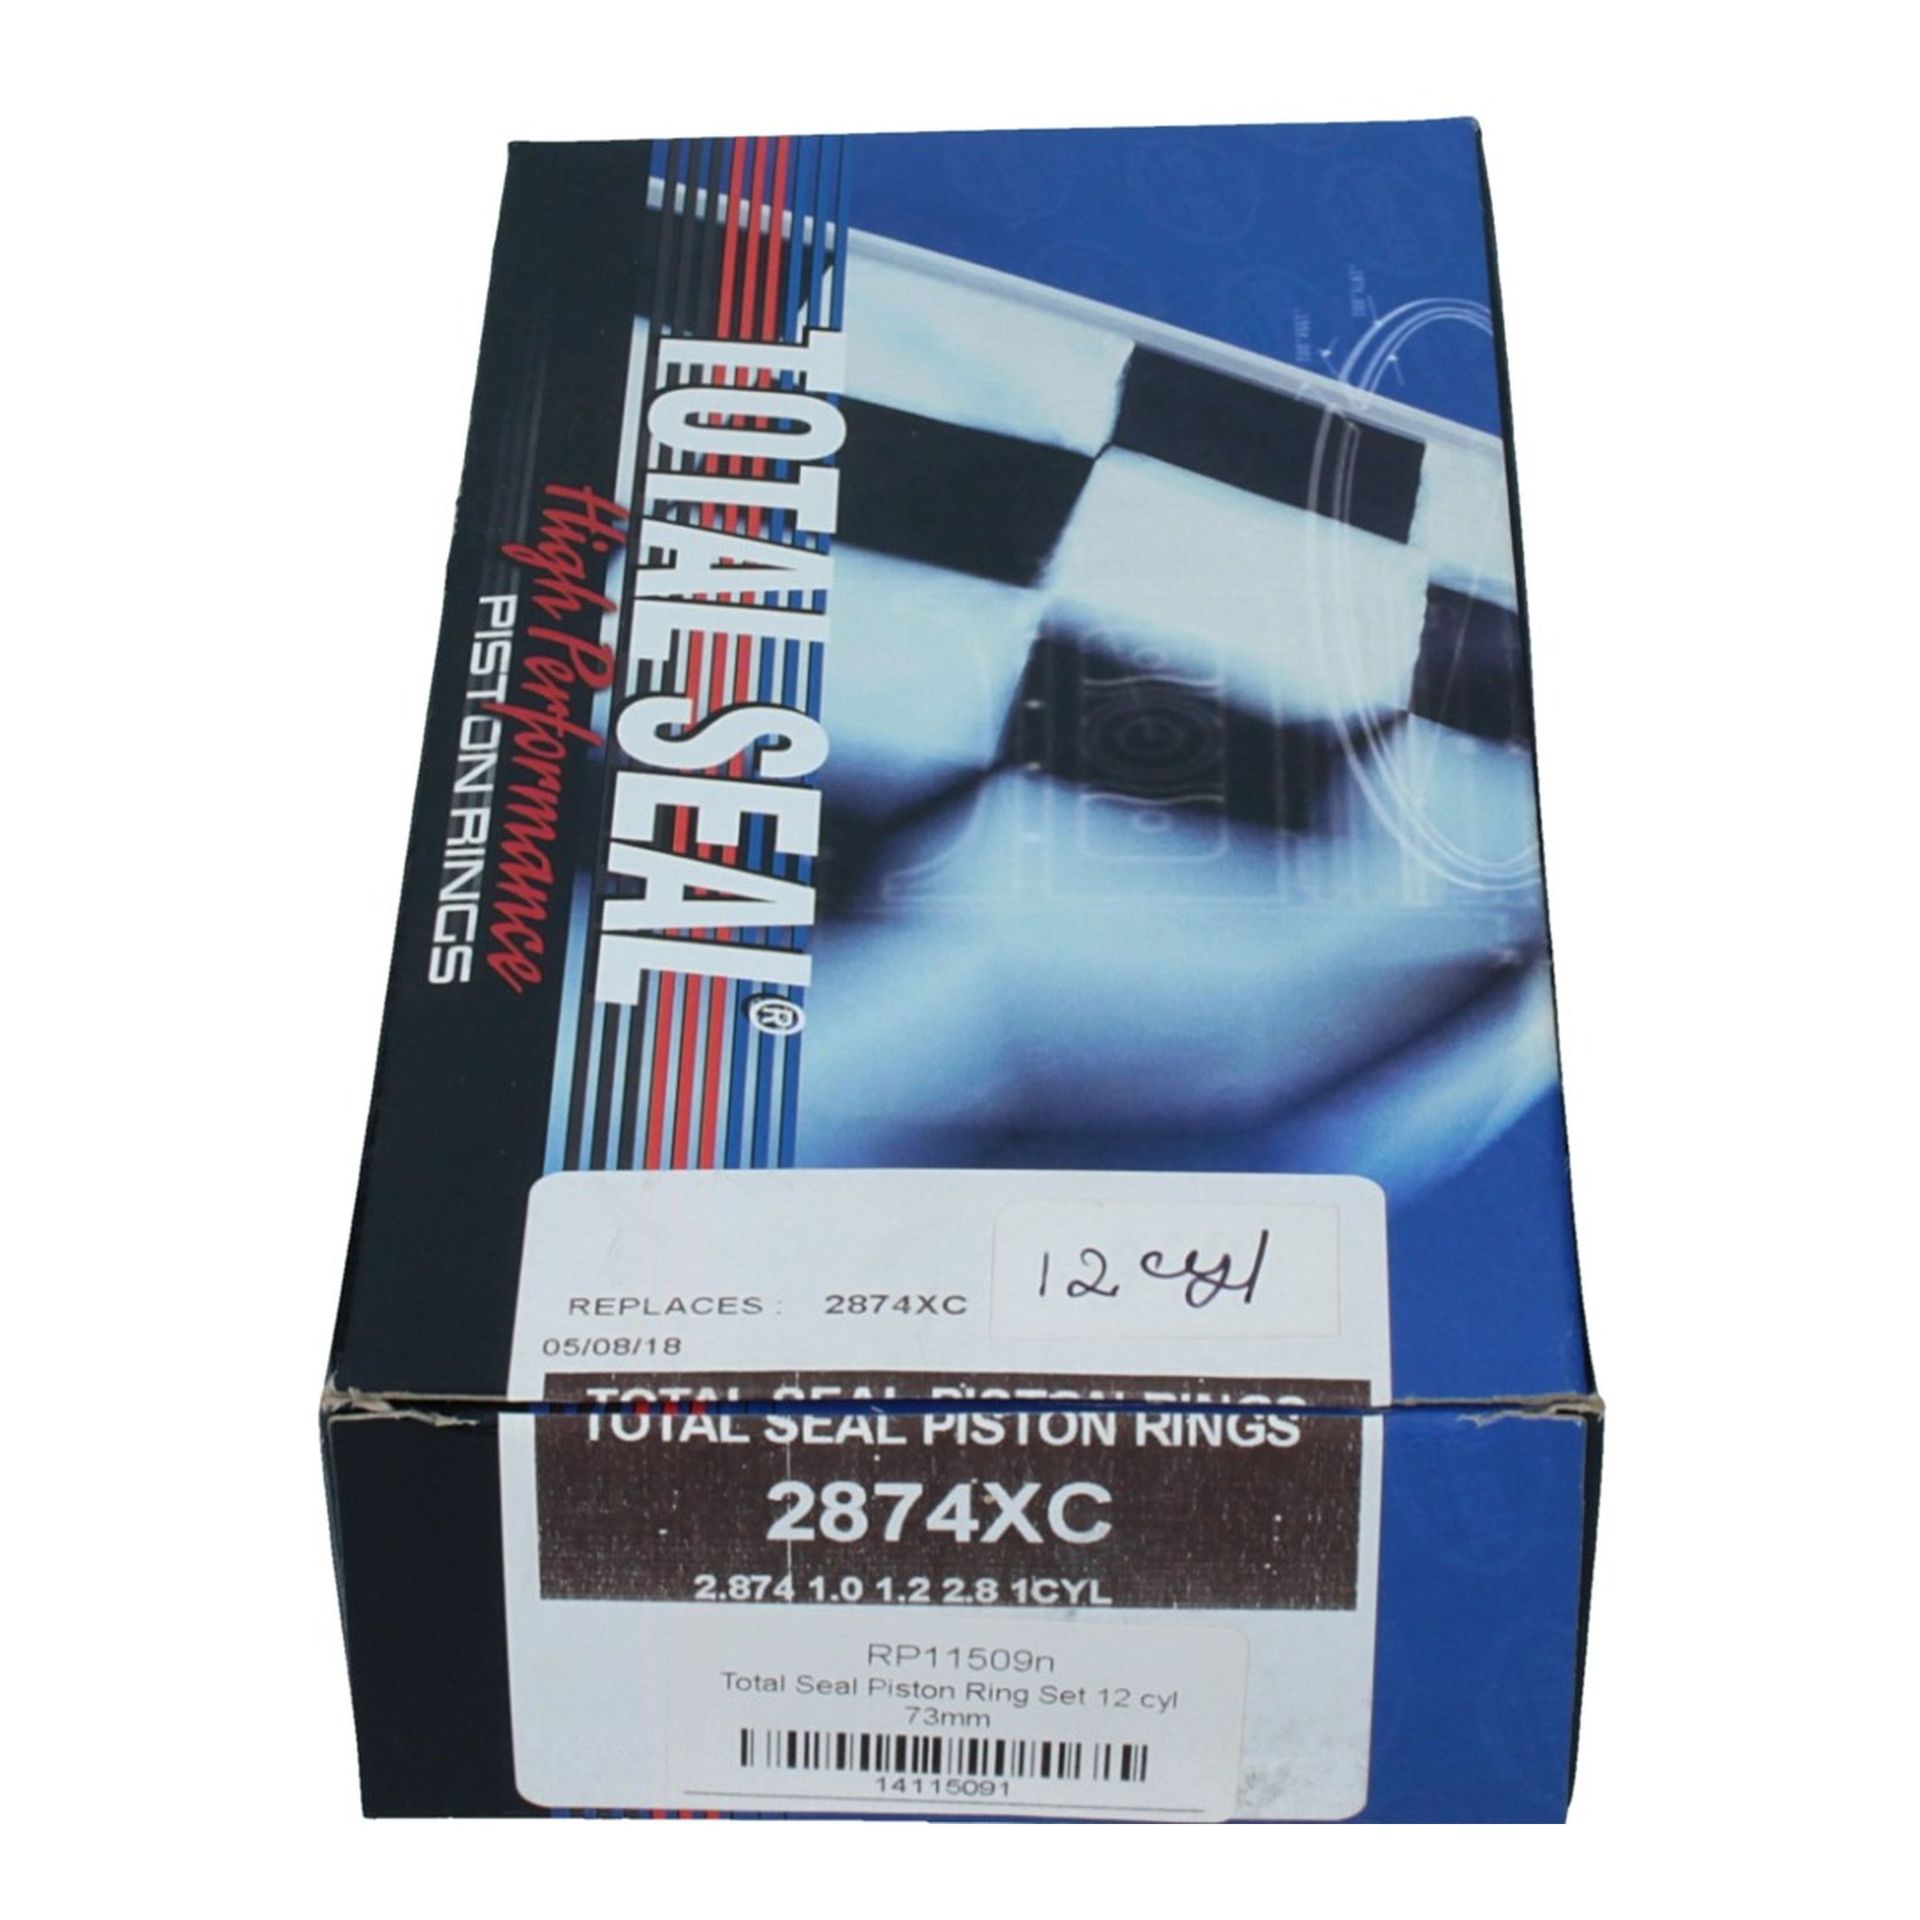 Total Seal Piston Ring Set 12 Cyl 73mm